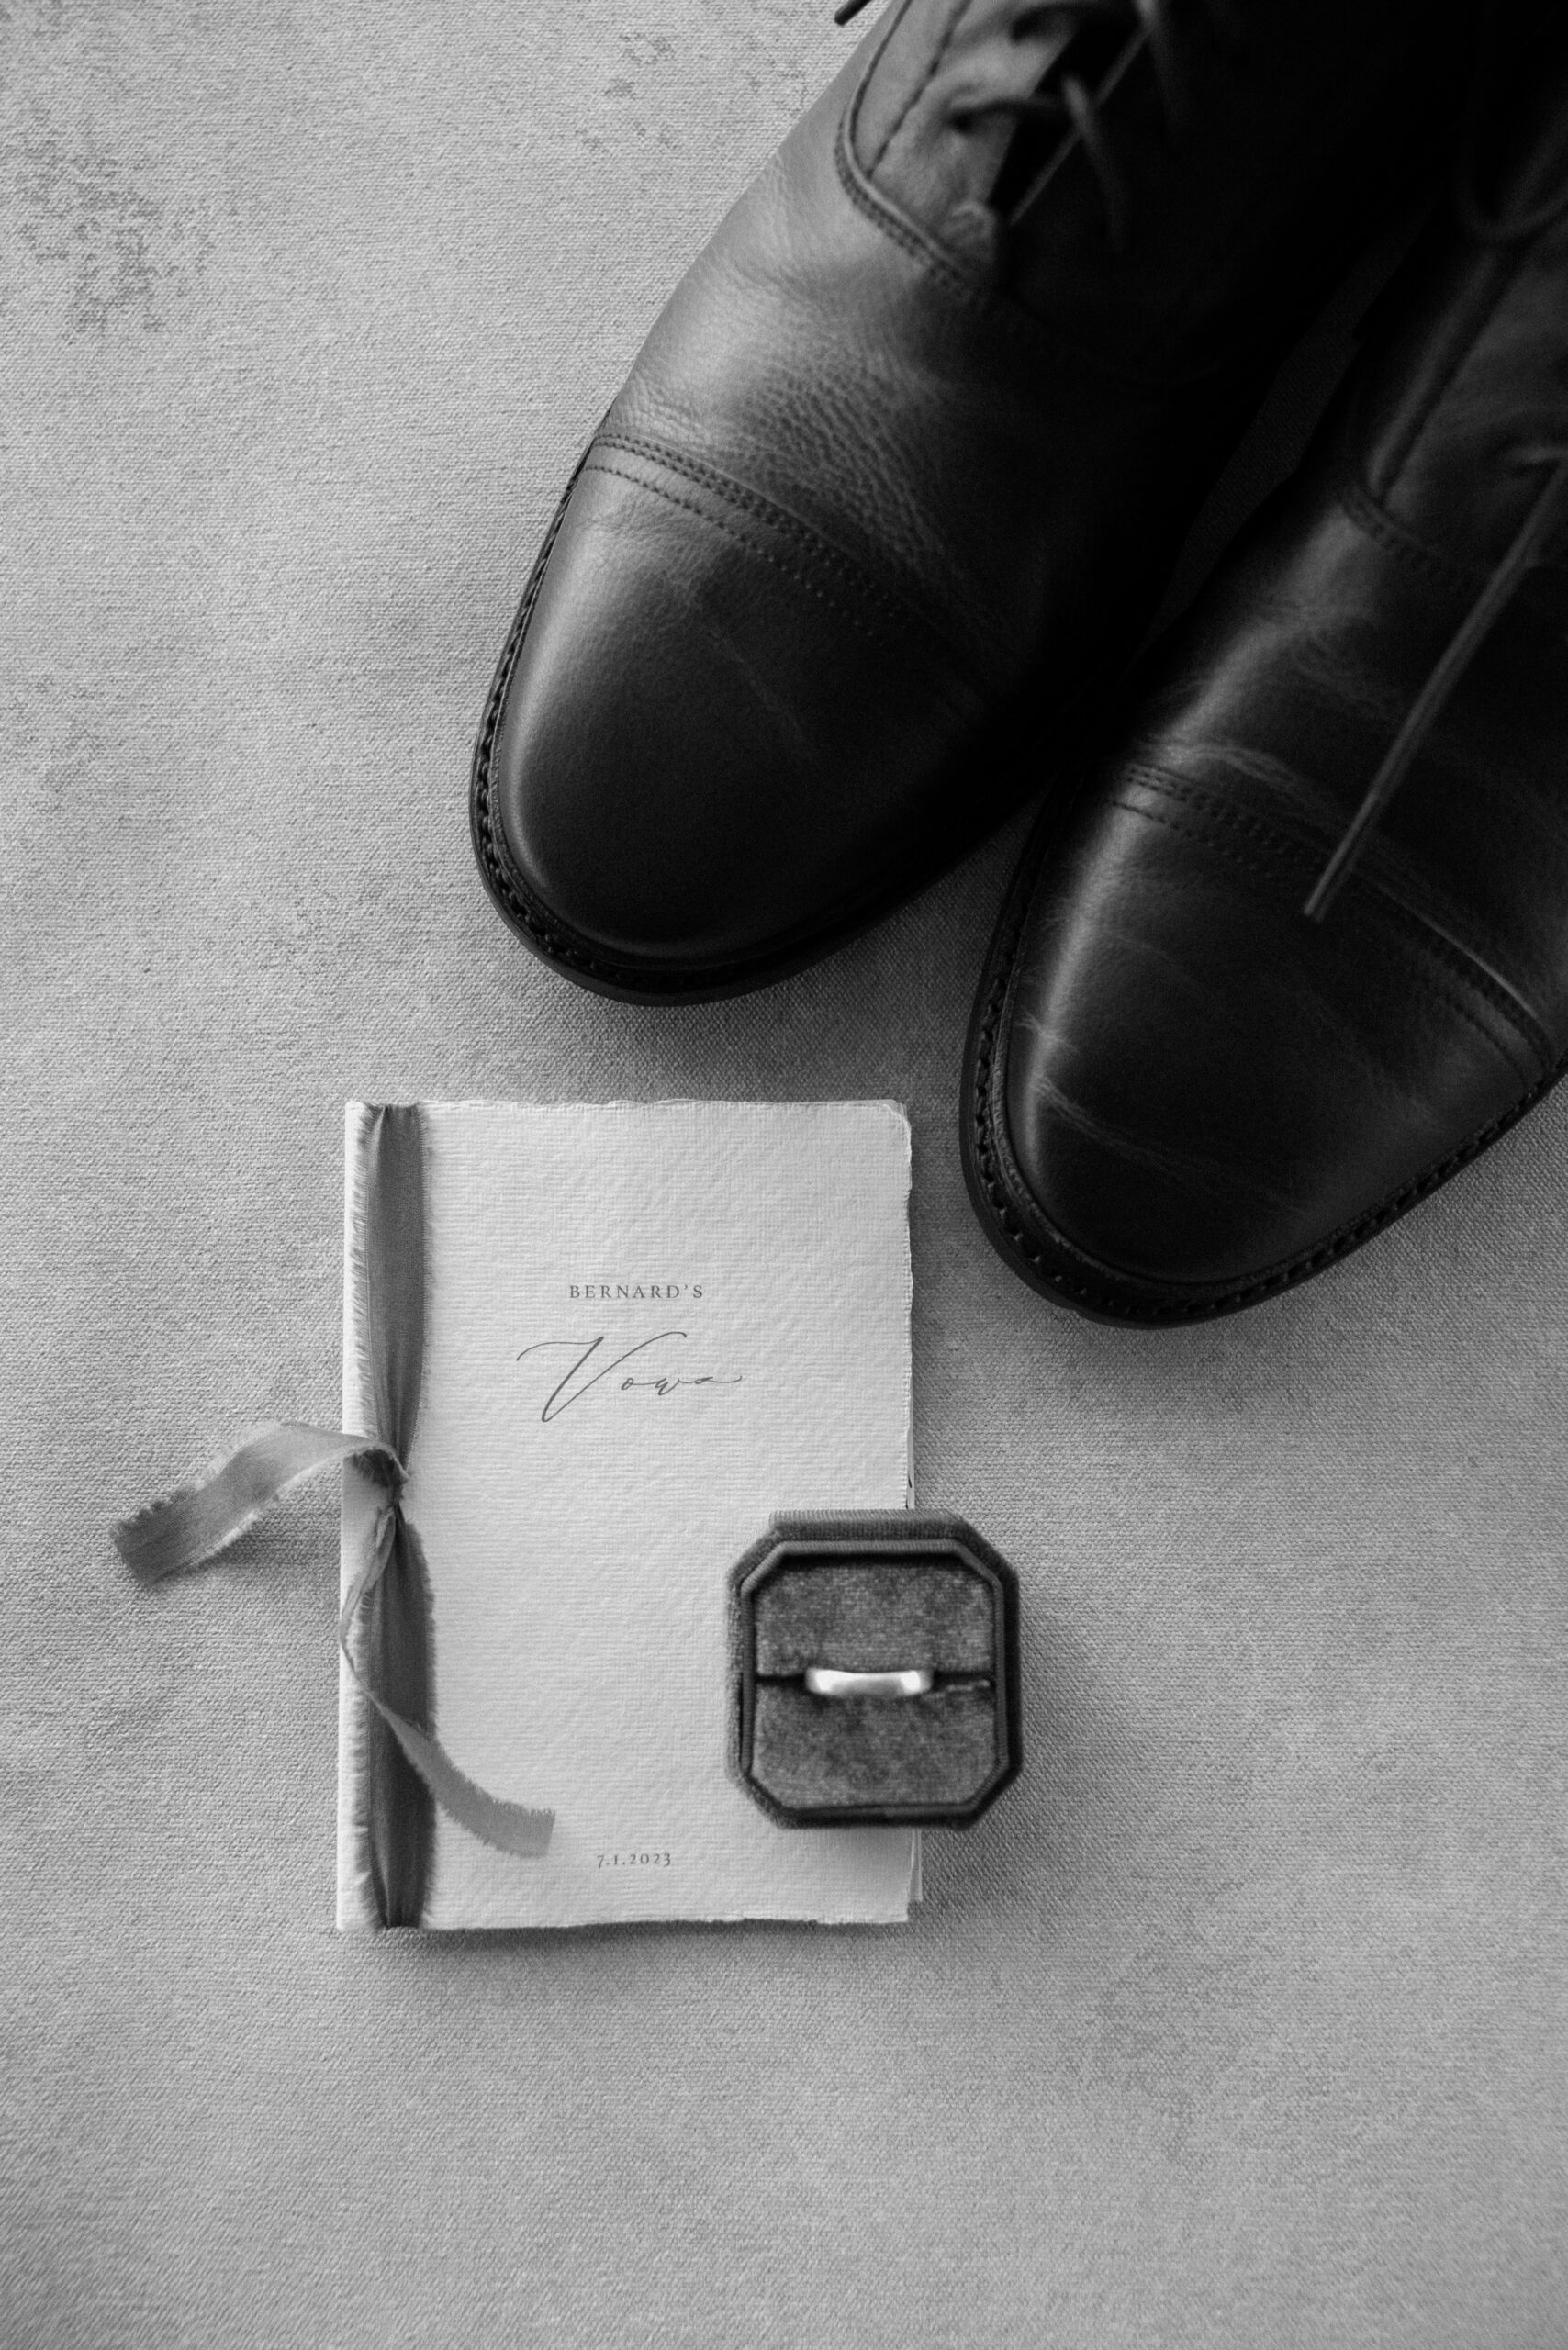 A black and white photo of a groom's vow book, wedding ring, and shoes. Photo by Ashley Joyce.